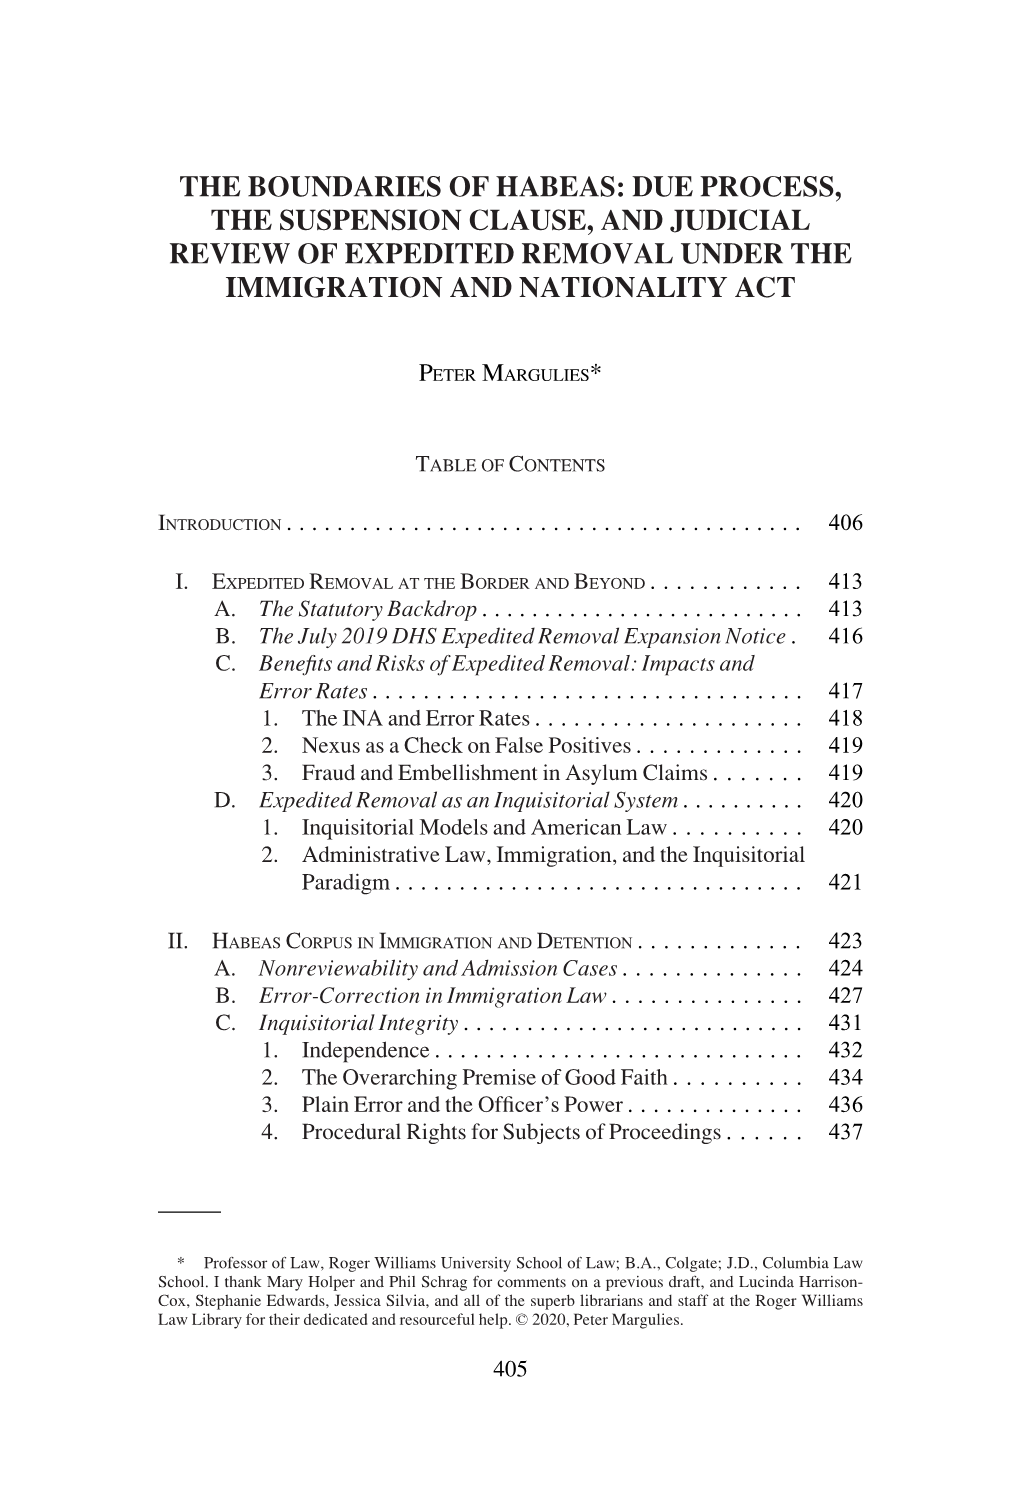 Due Process, the Suspension Clause, and Judicial Review of Expedited Removal Under the Immigration and Nationality Act